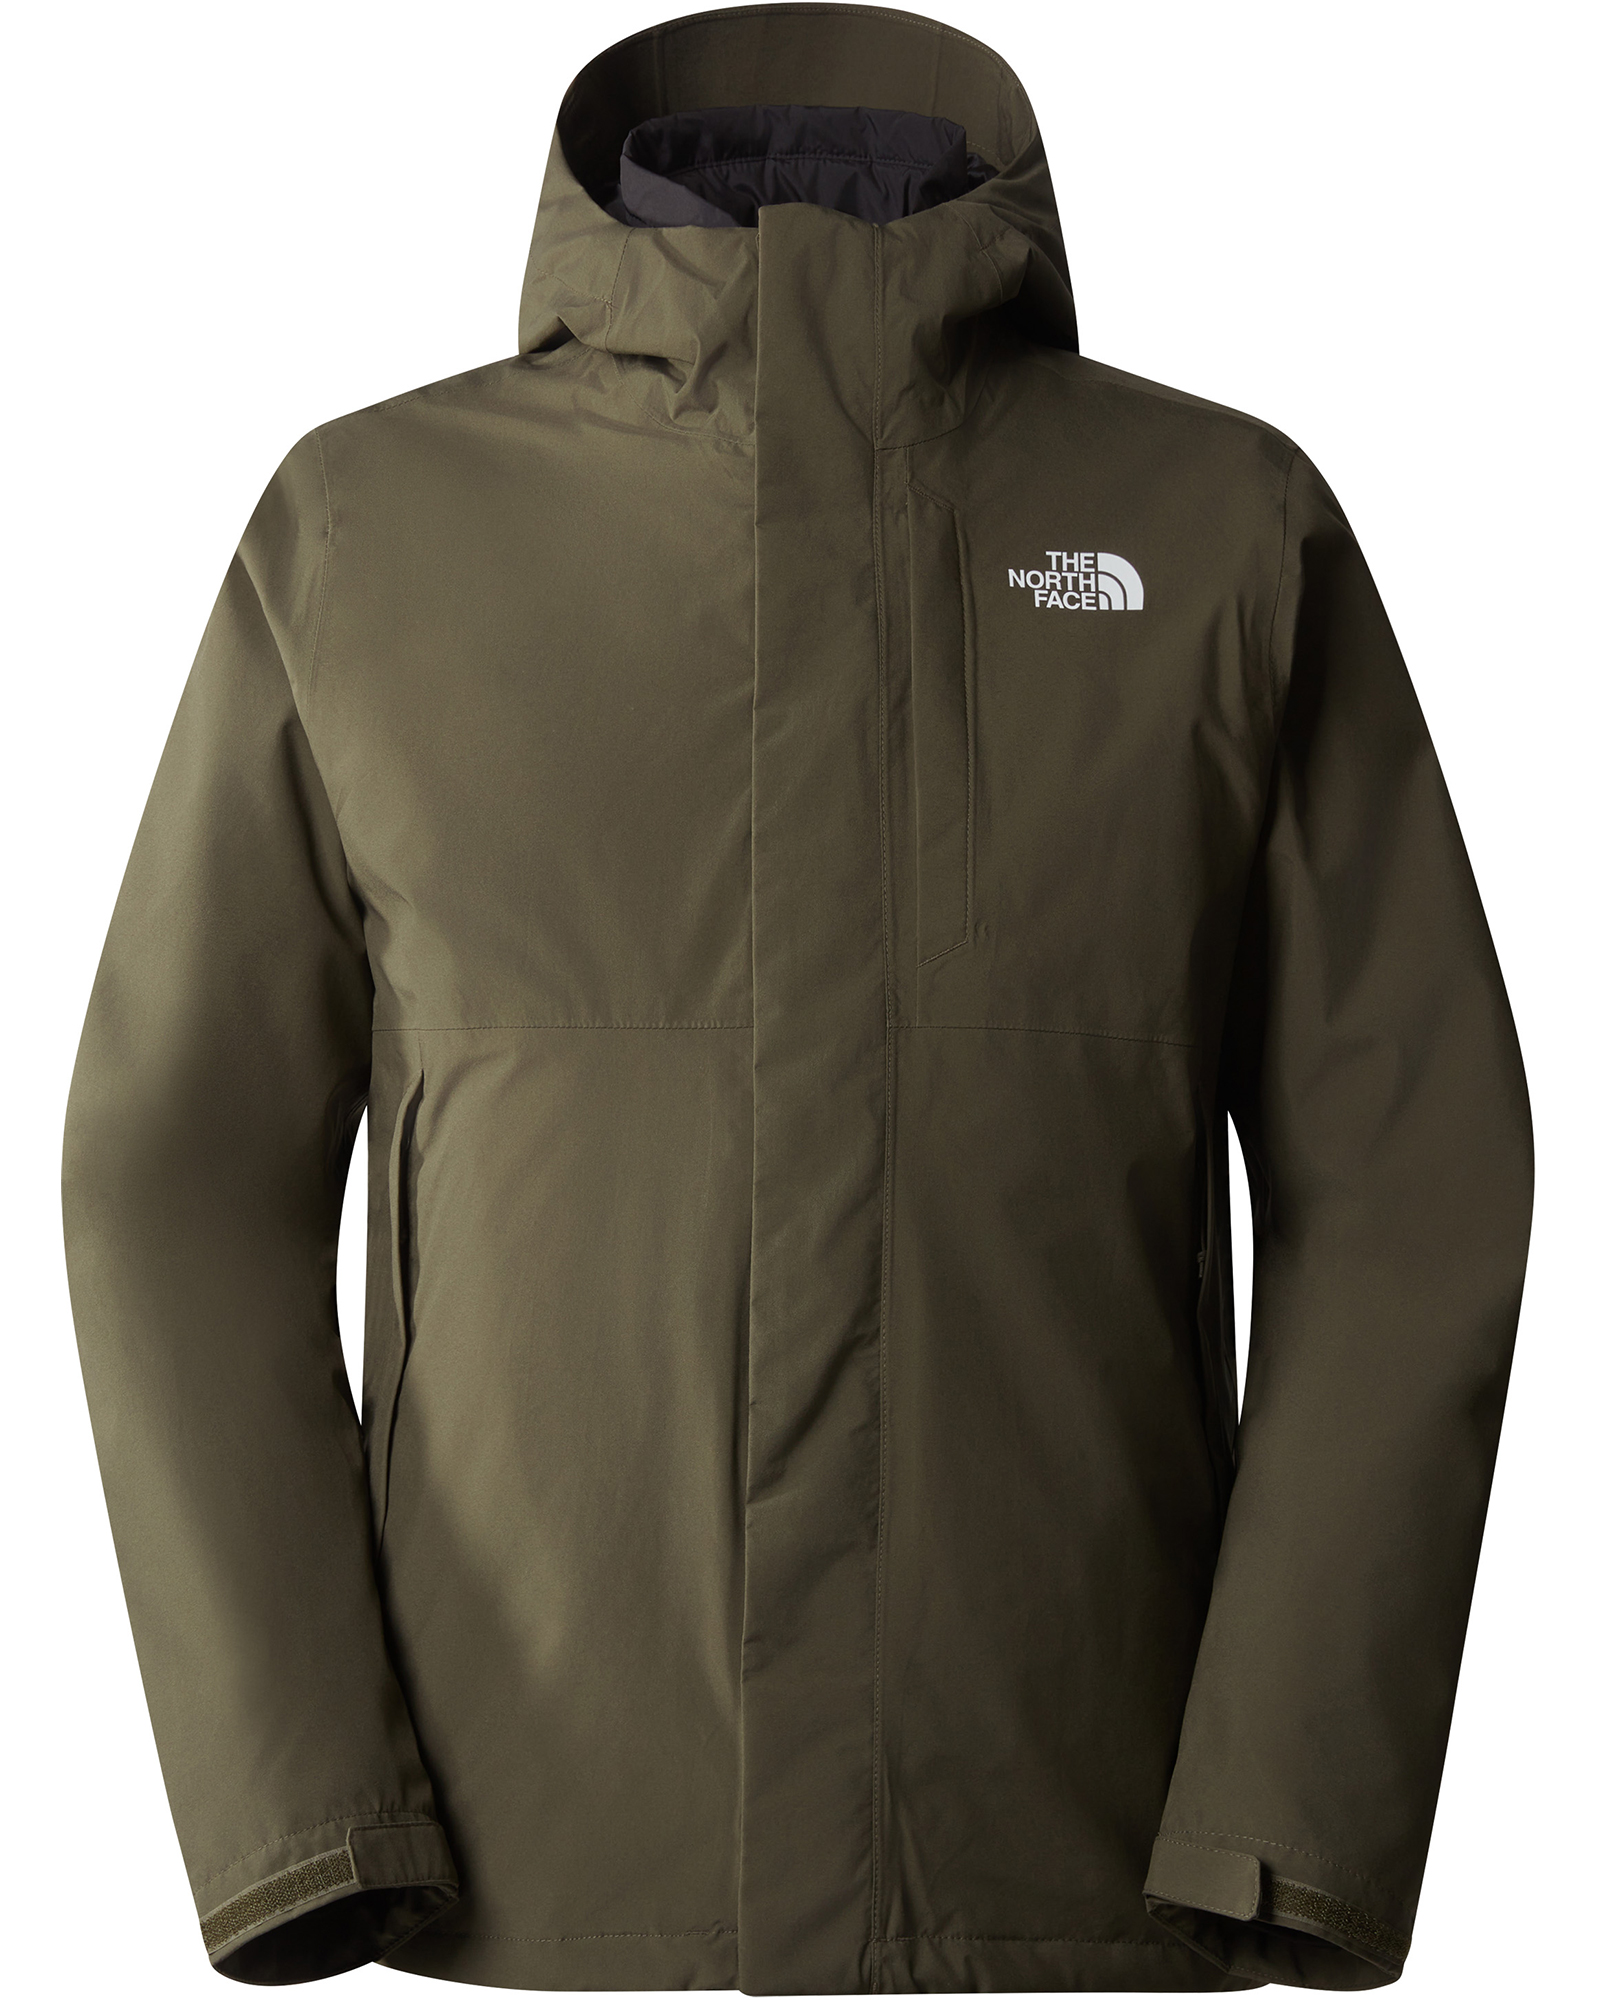 The North Face Carto Men’s Triclimate Jacket - New Taupe Green-TNF Black S